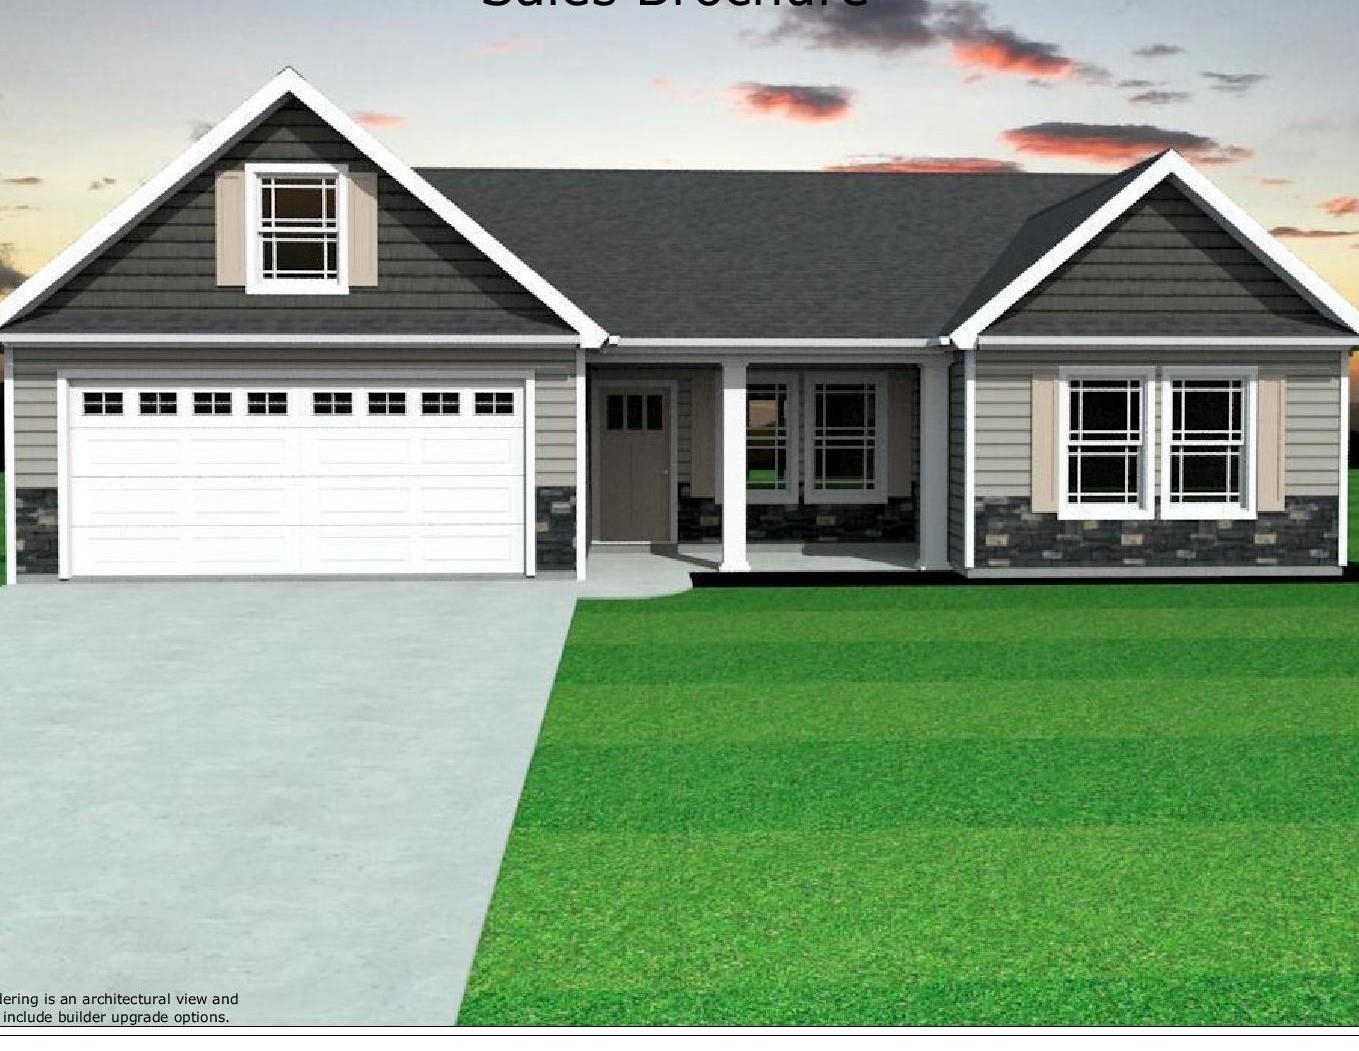 This is the STARTEX floorplan. Open concept 3 bedroom 2 bathroom home, trey ceiling with rope lighting in master bedroom, gas fireplace, 12x12 back patio. Located in the NEW Elliott park community in Lyman just minutes from Spartanburg and Greenville. Call today for more info!